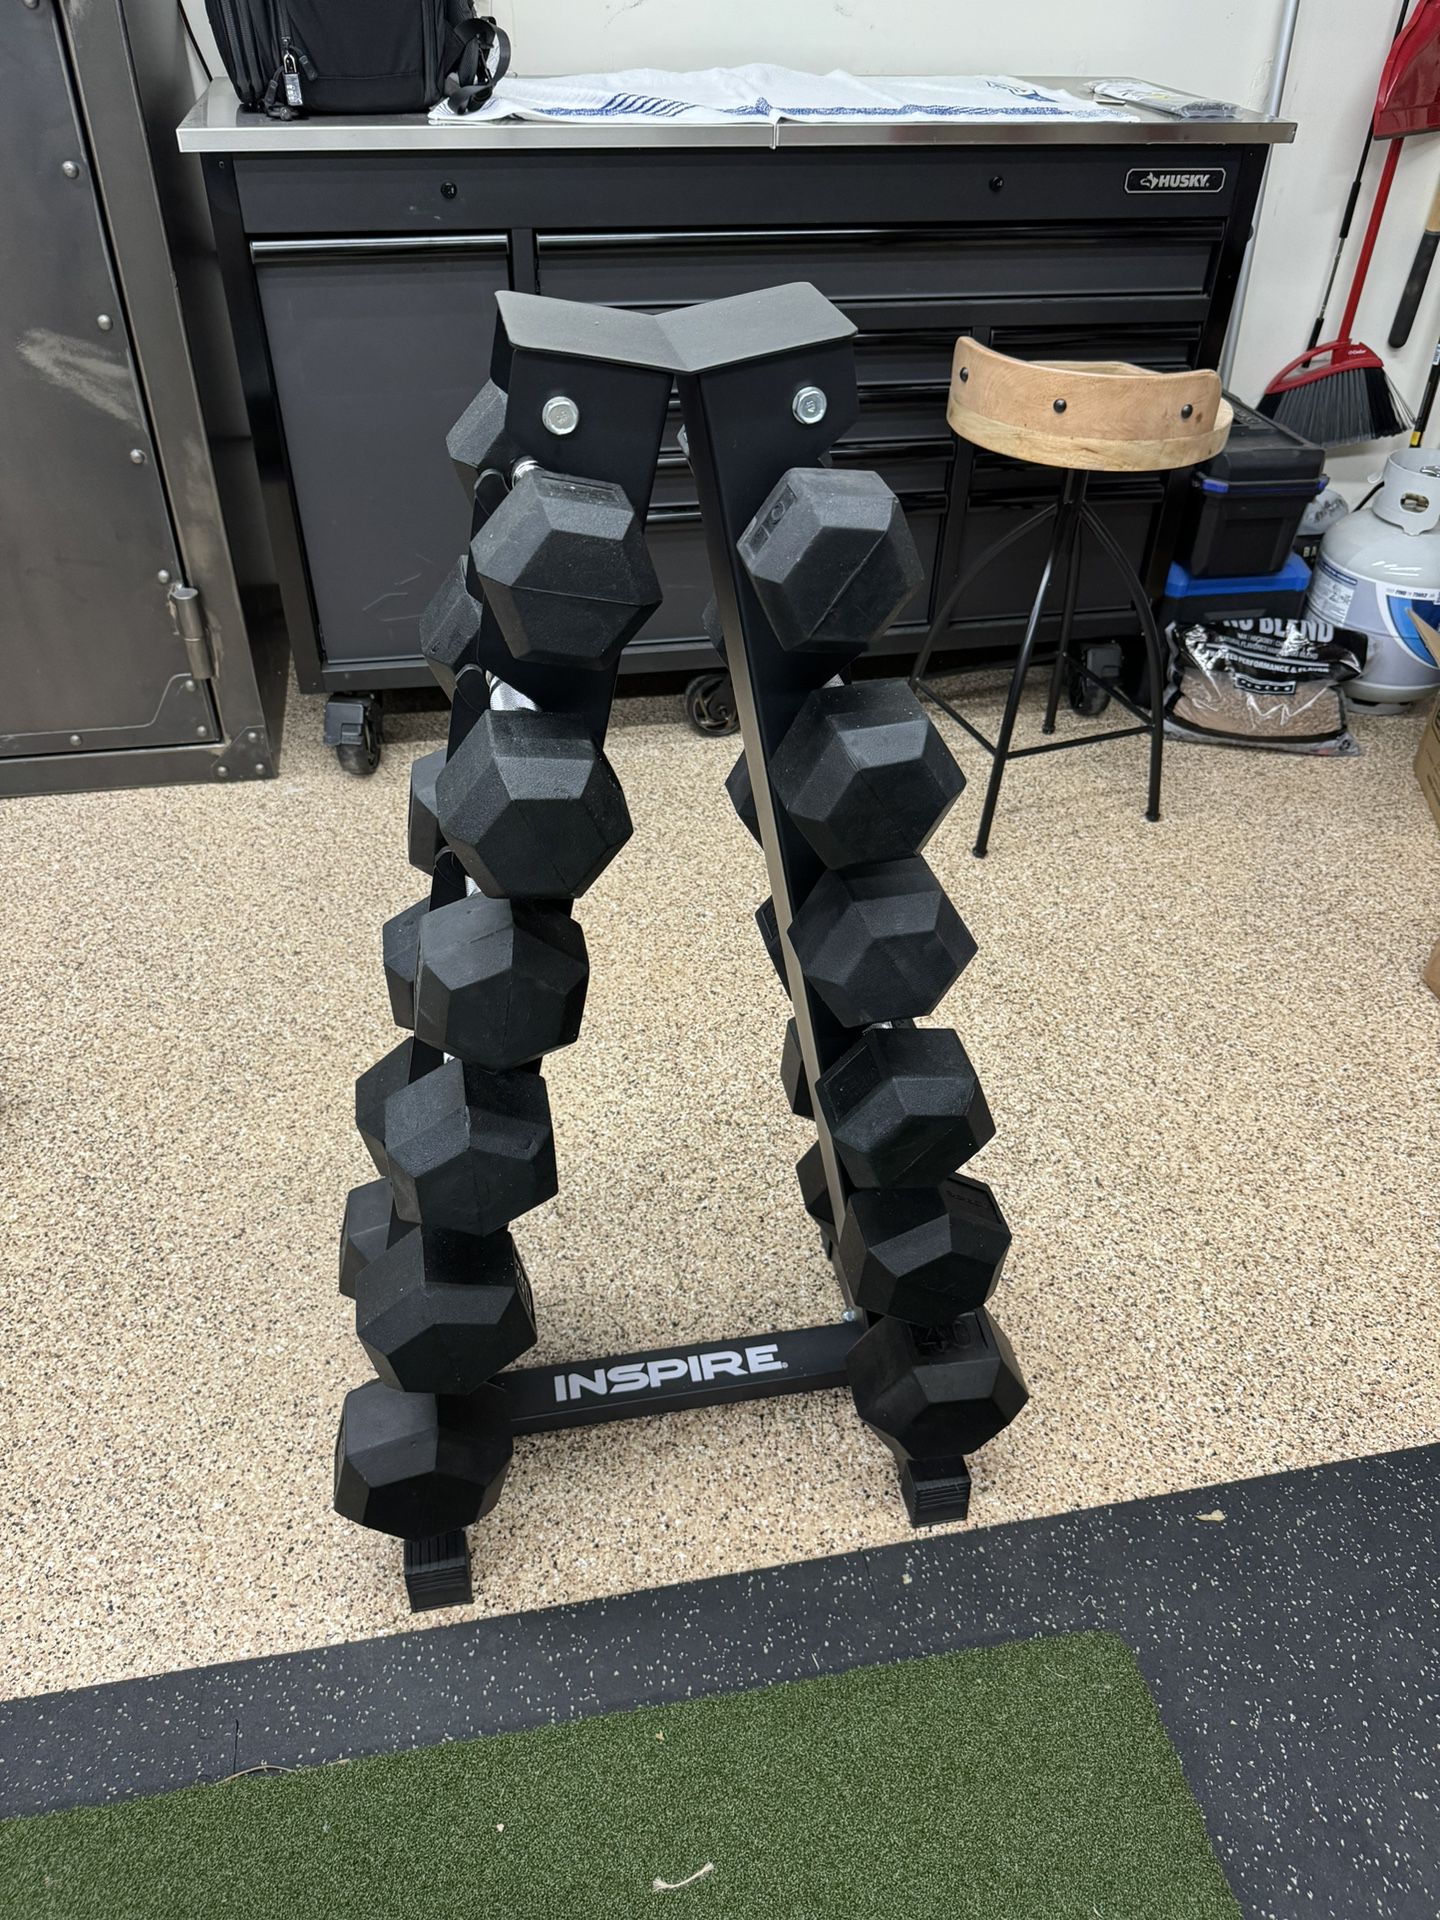 Dumbbell Set Up To 40lbs